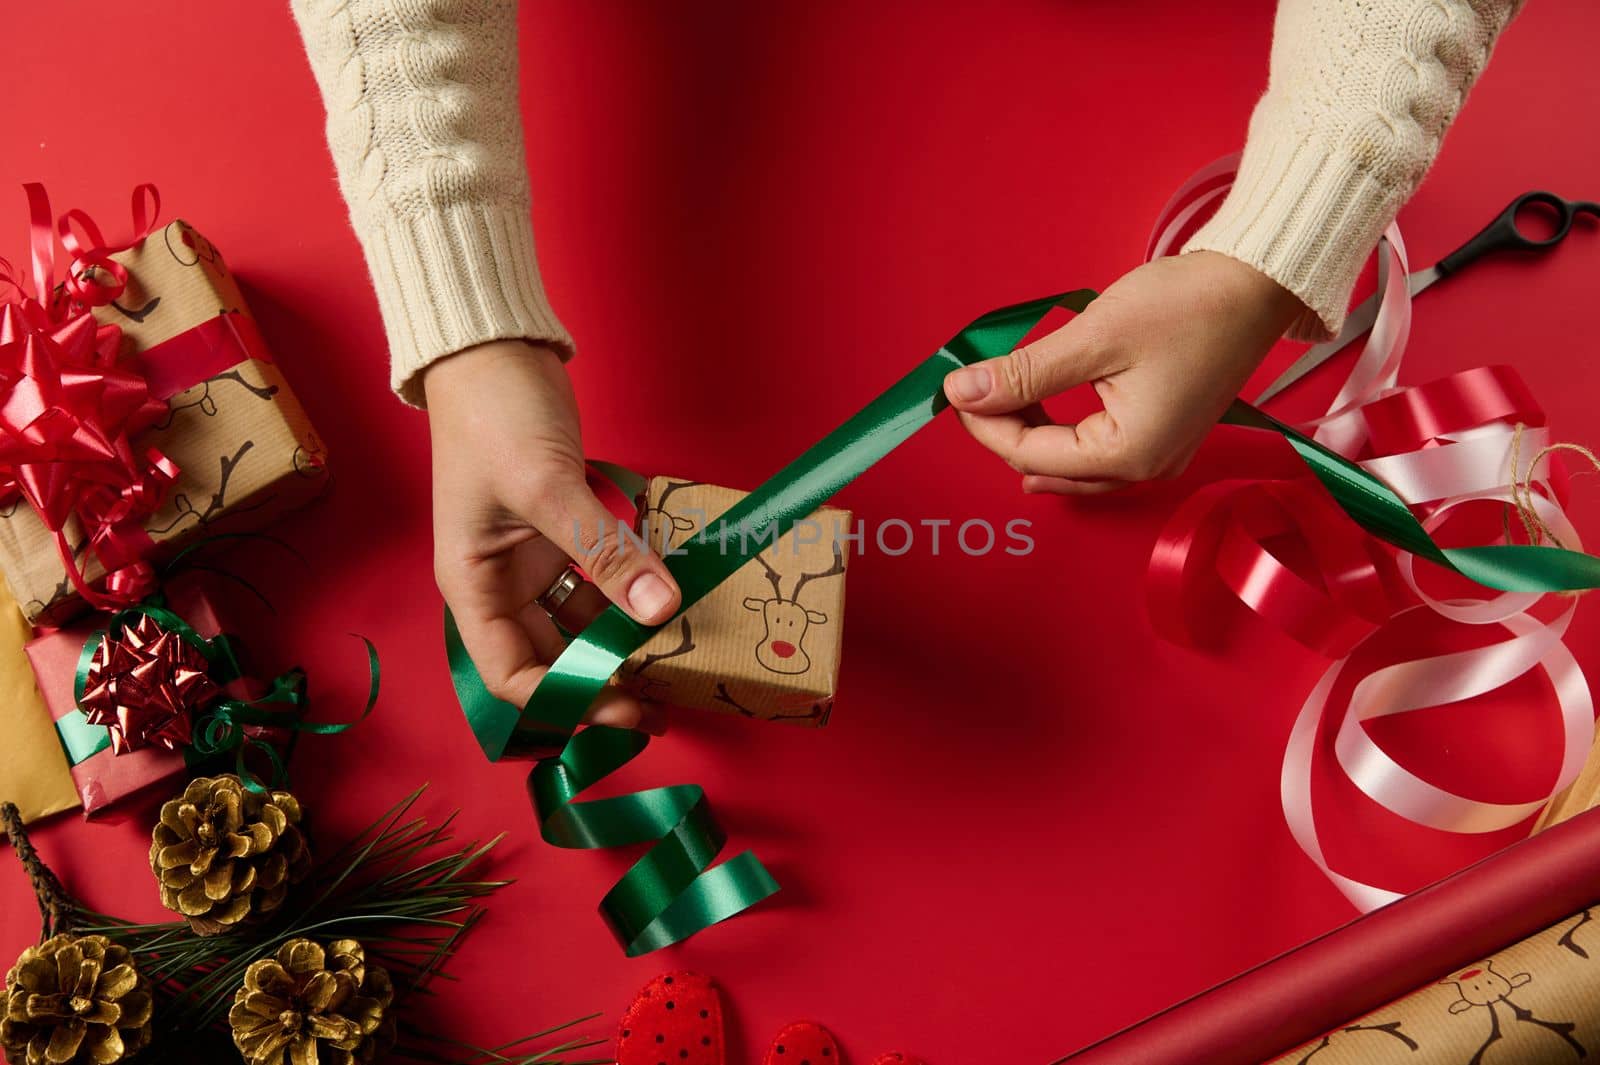 Christmas wrapping idea, xmas wrapping workspace. Female hands wrap gift box in paper and tying bow on red surface. Close Up woman wraps a present, decorates with shiny green ribbon and red tied bow